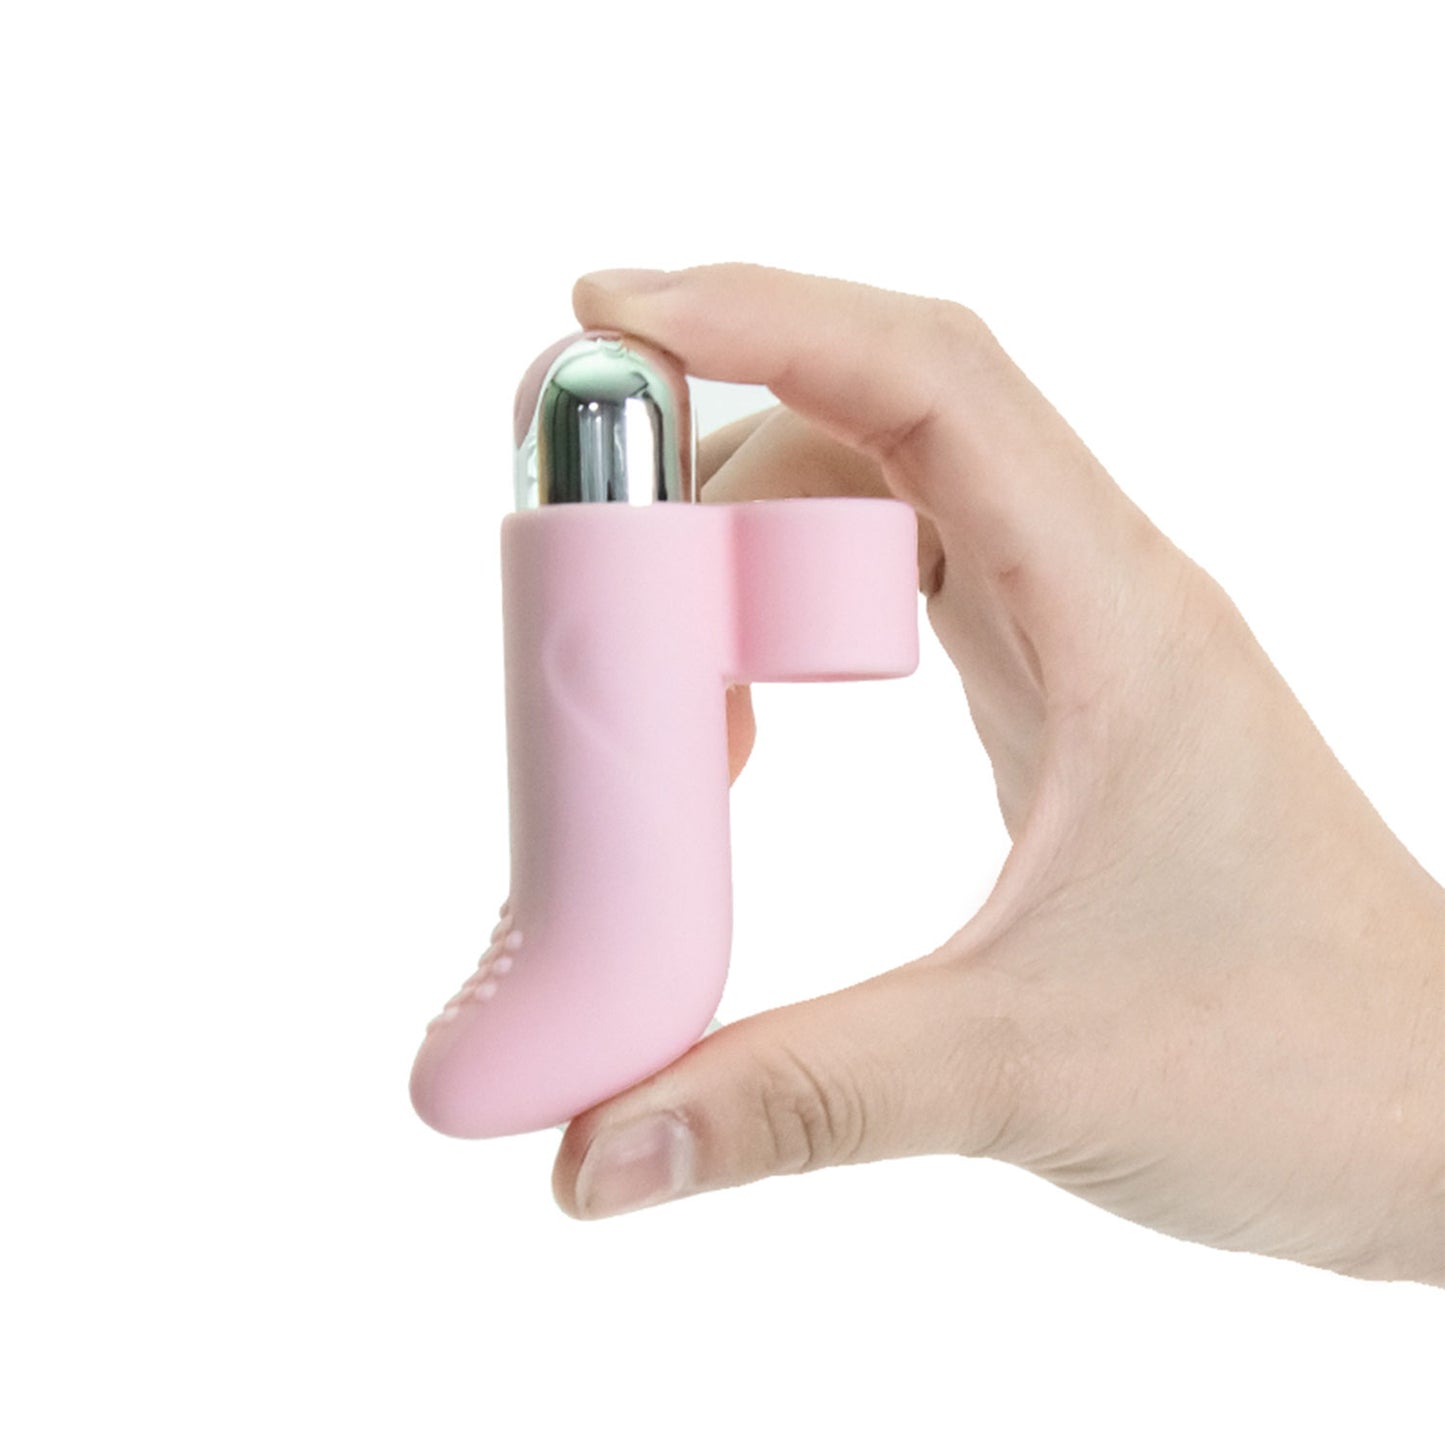 The Horny Company - Bang! Rechargeable Finger Bullet Vibrator Pink